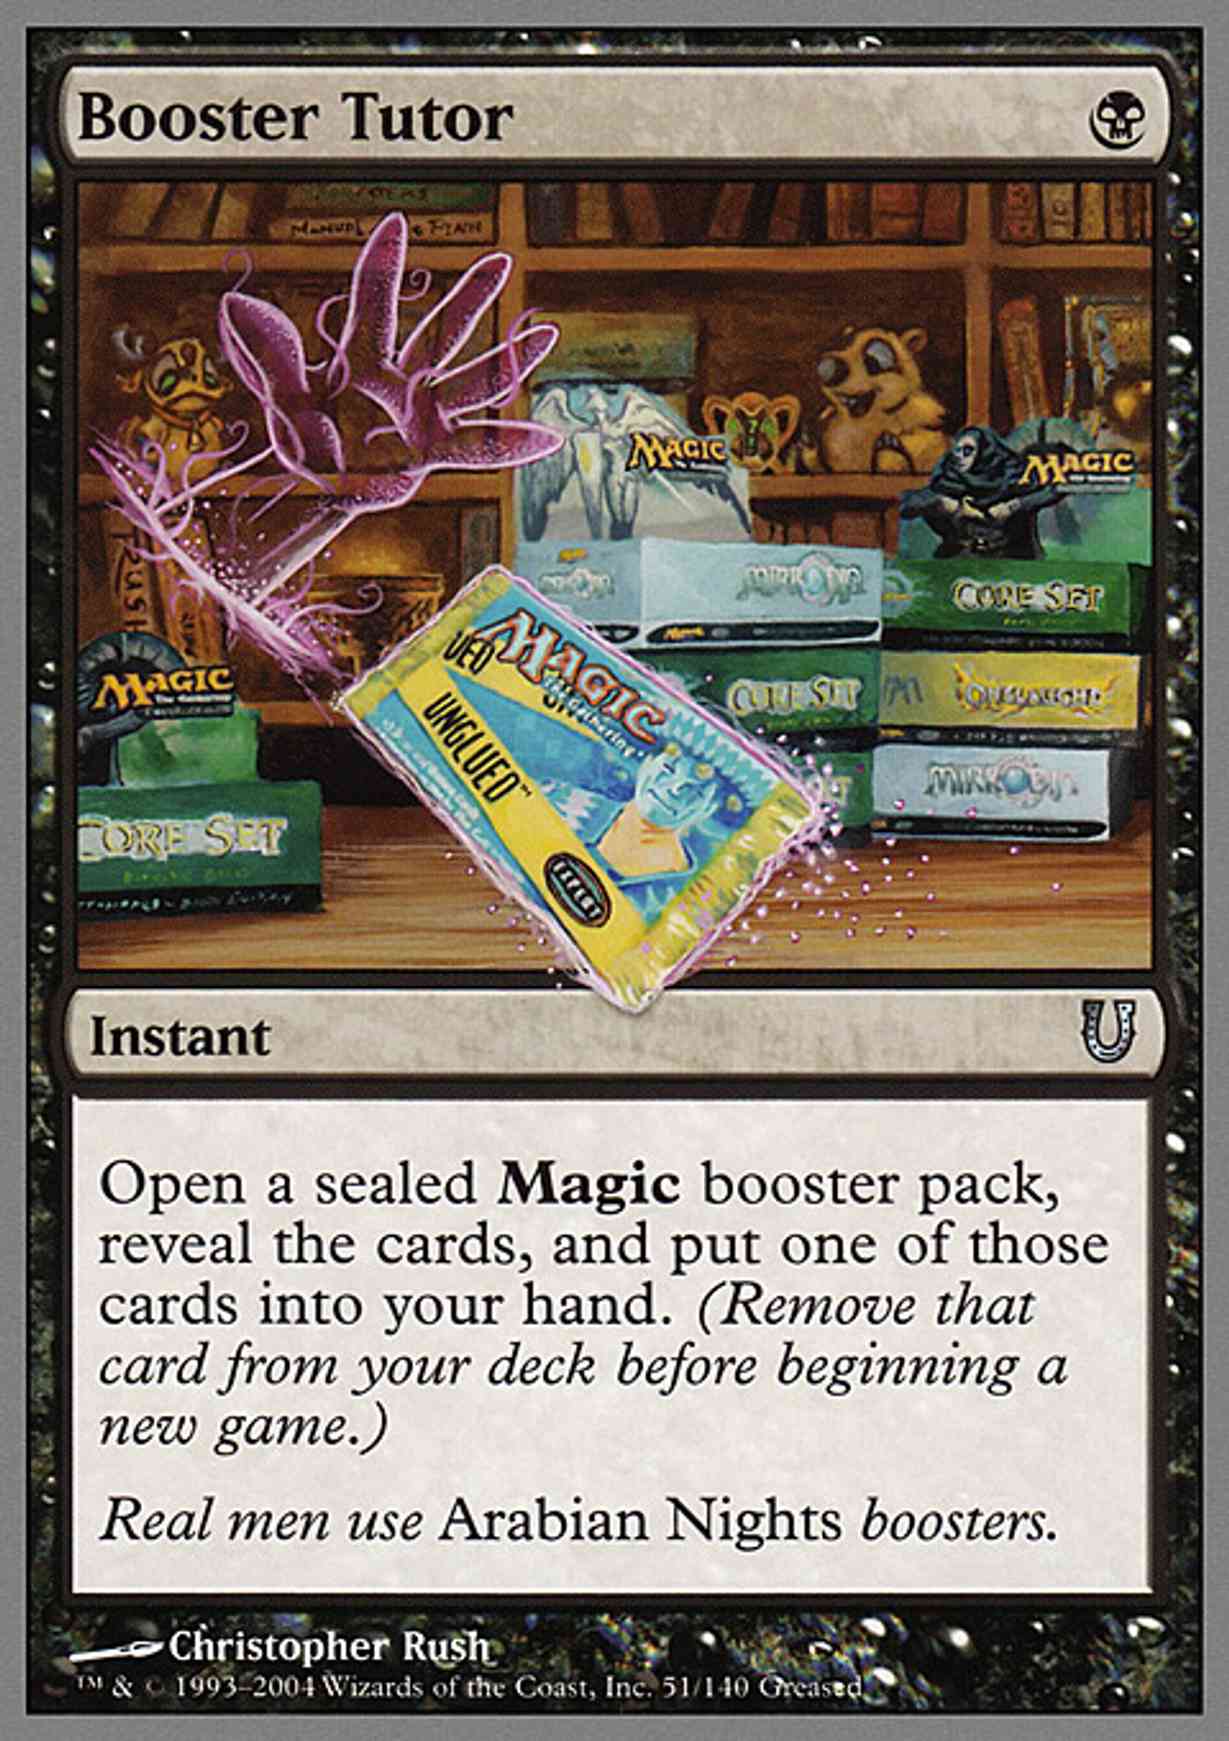 Booster Tutor magic card front